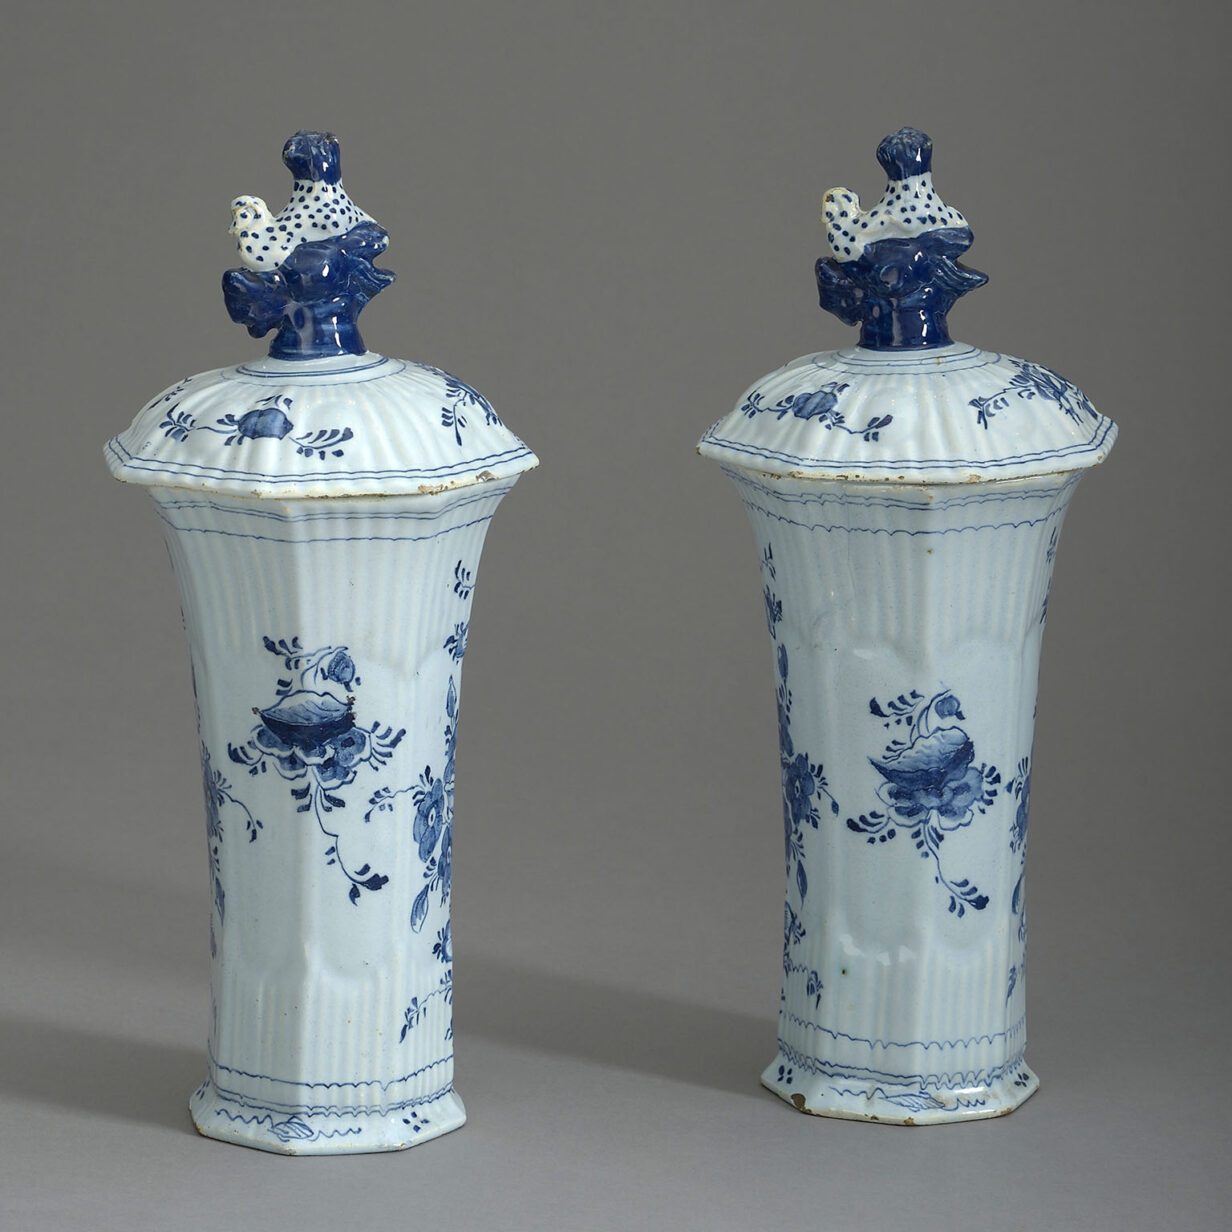 Pair of blue and white delft vases